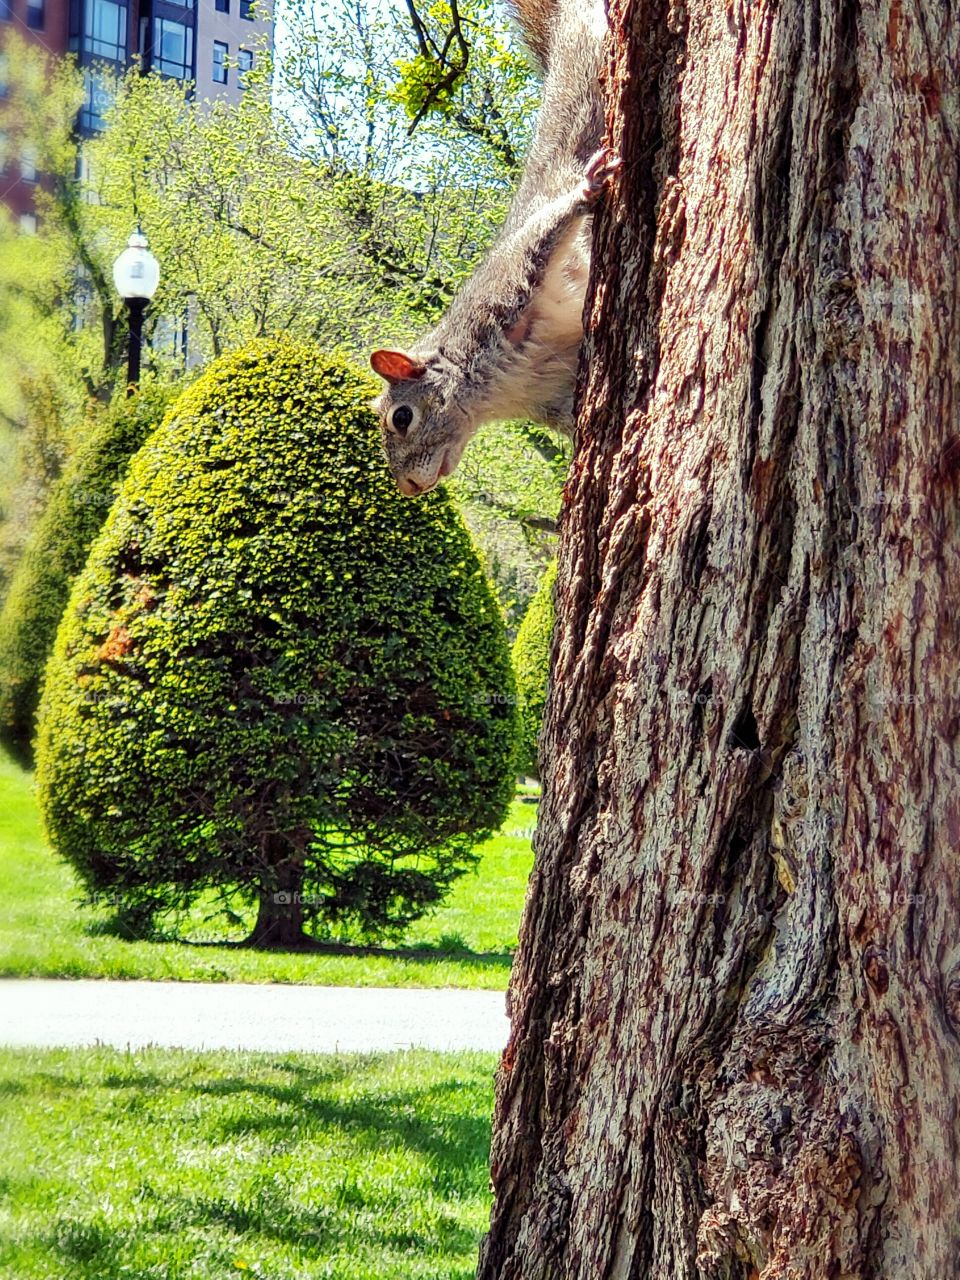 peek-a-boo with a squirrel in a Boston park